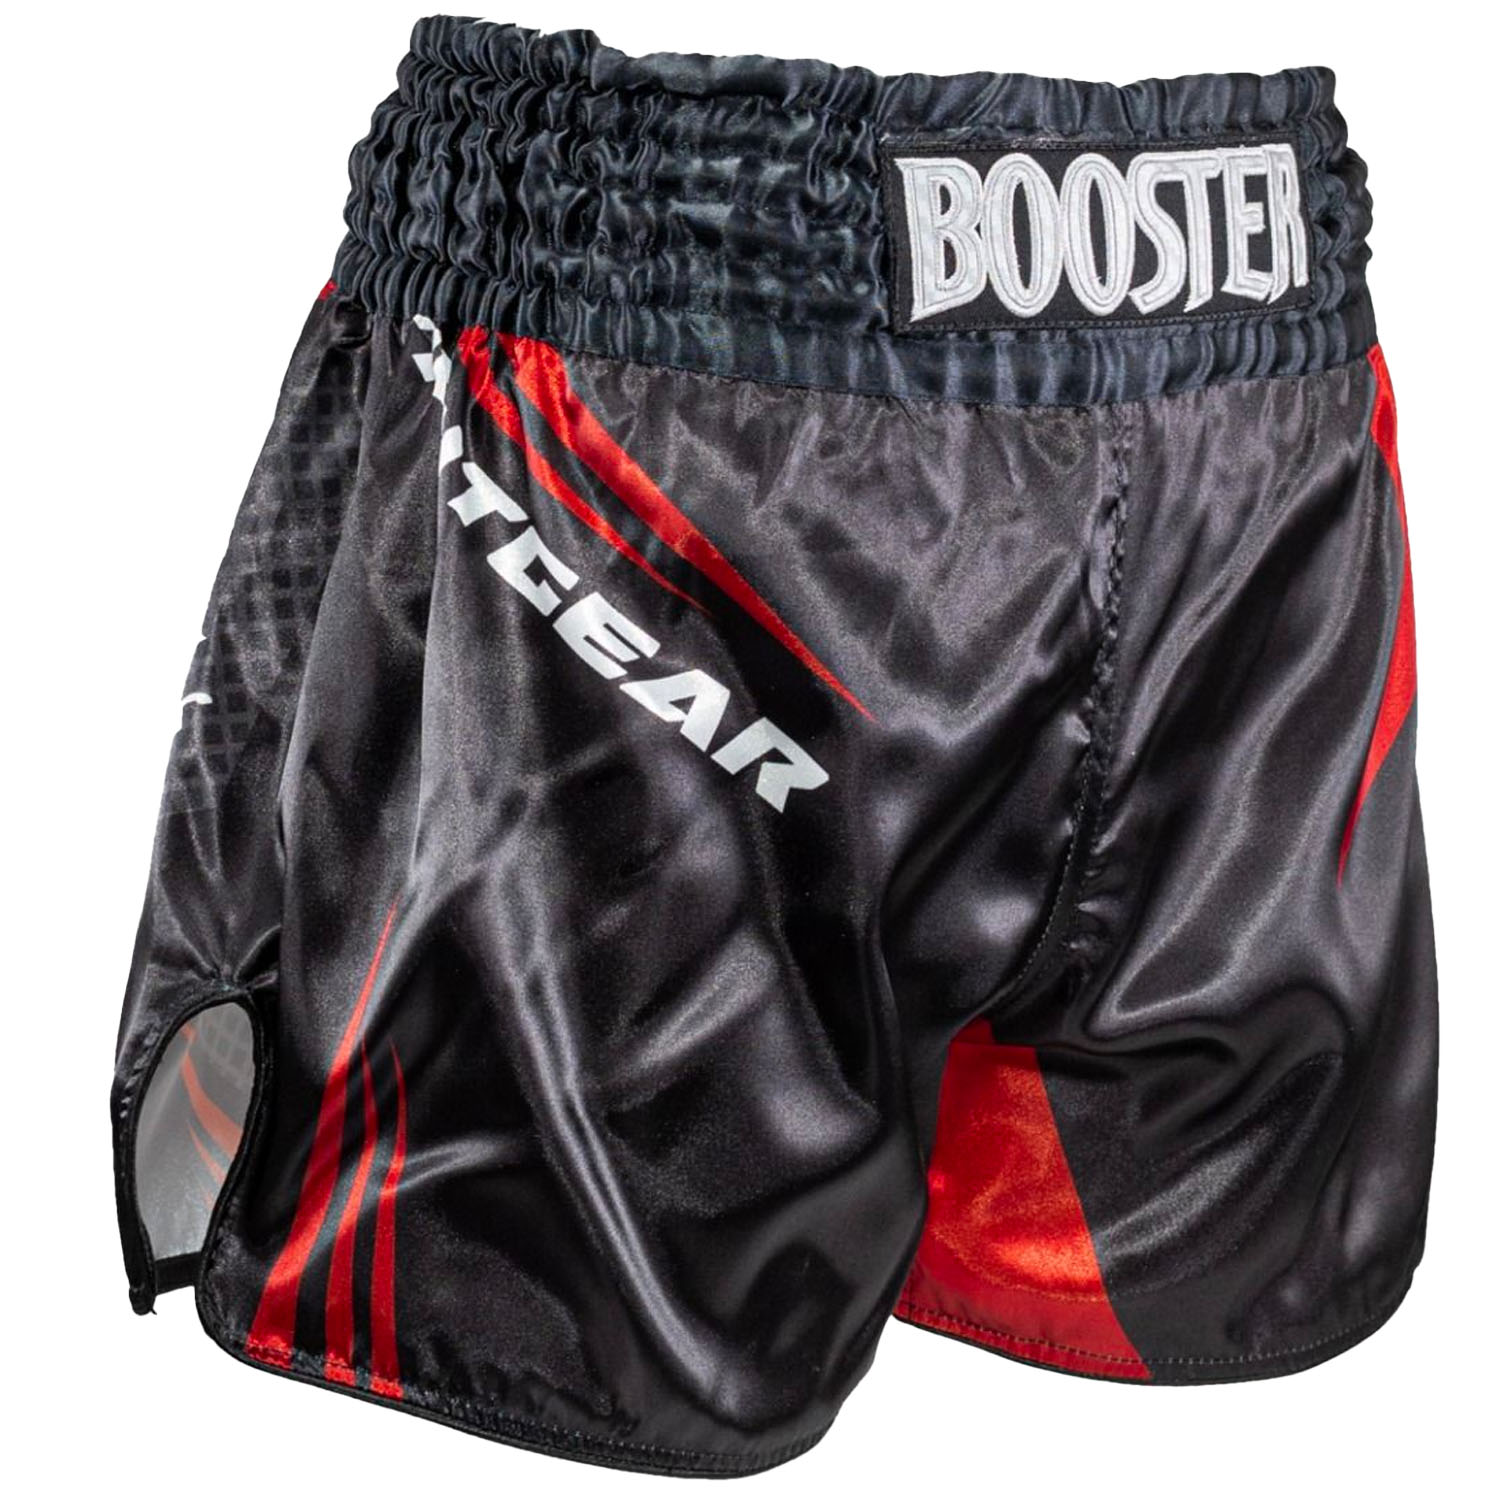 Booster Muay Thai Shorts, AD Xplosion 2, black-red